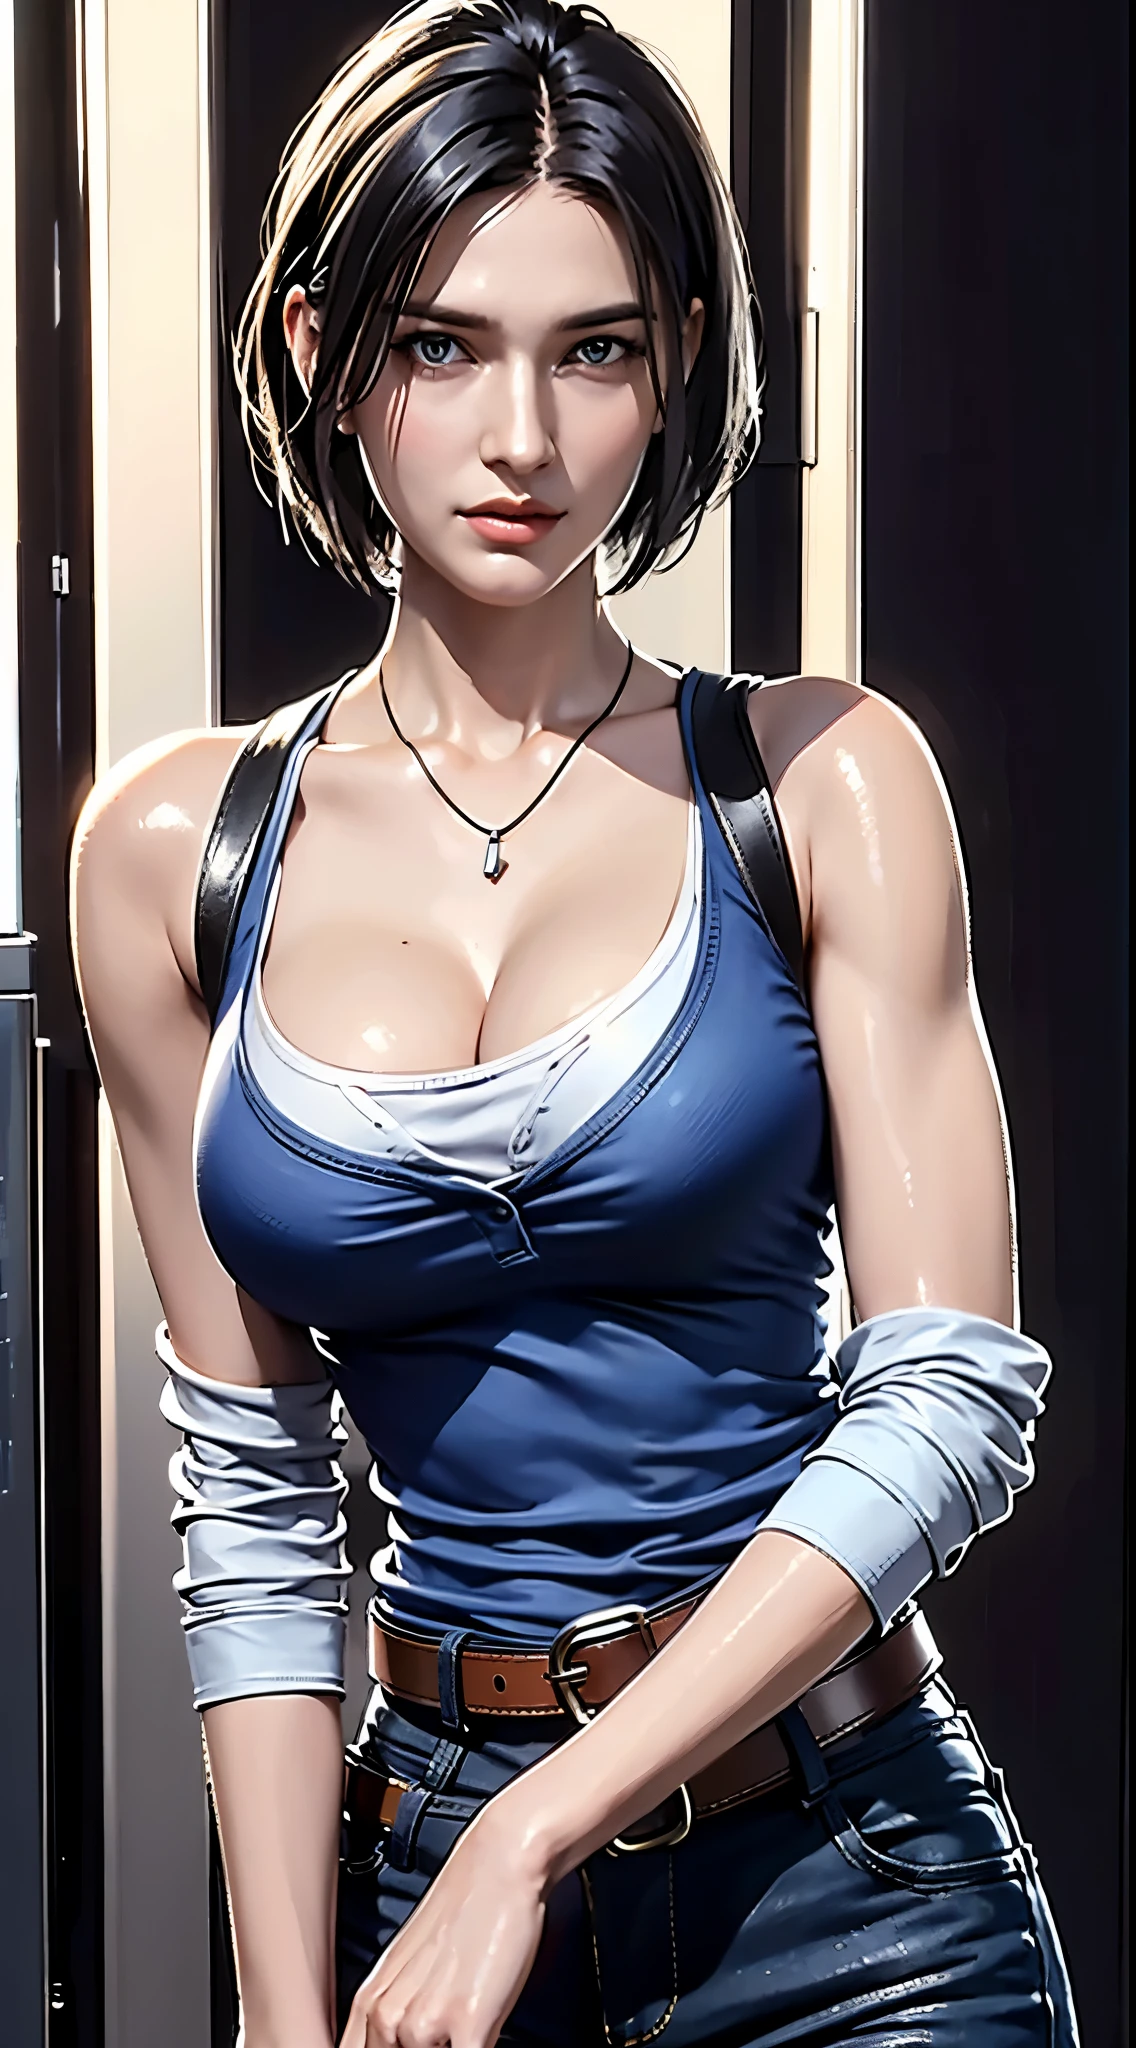 photorealistic, high resolution, 1women, mature female, solo, hips up, black hair, short hair, longsleeve blue shirt, belt, pants, police, cleavage, (downblouse), necklace,Jill Valentine - Resident Evil Series